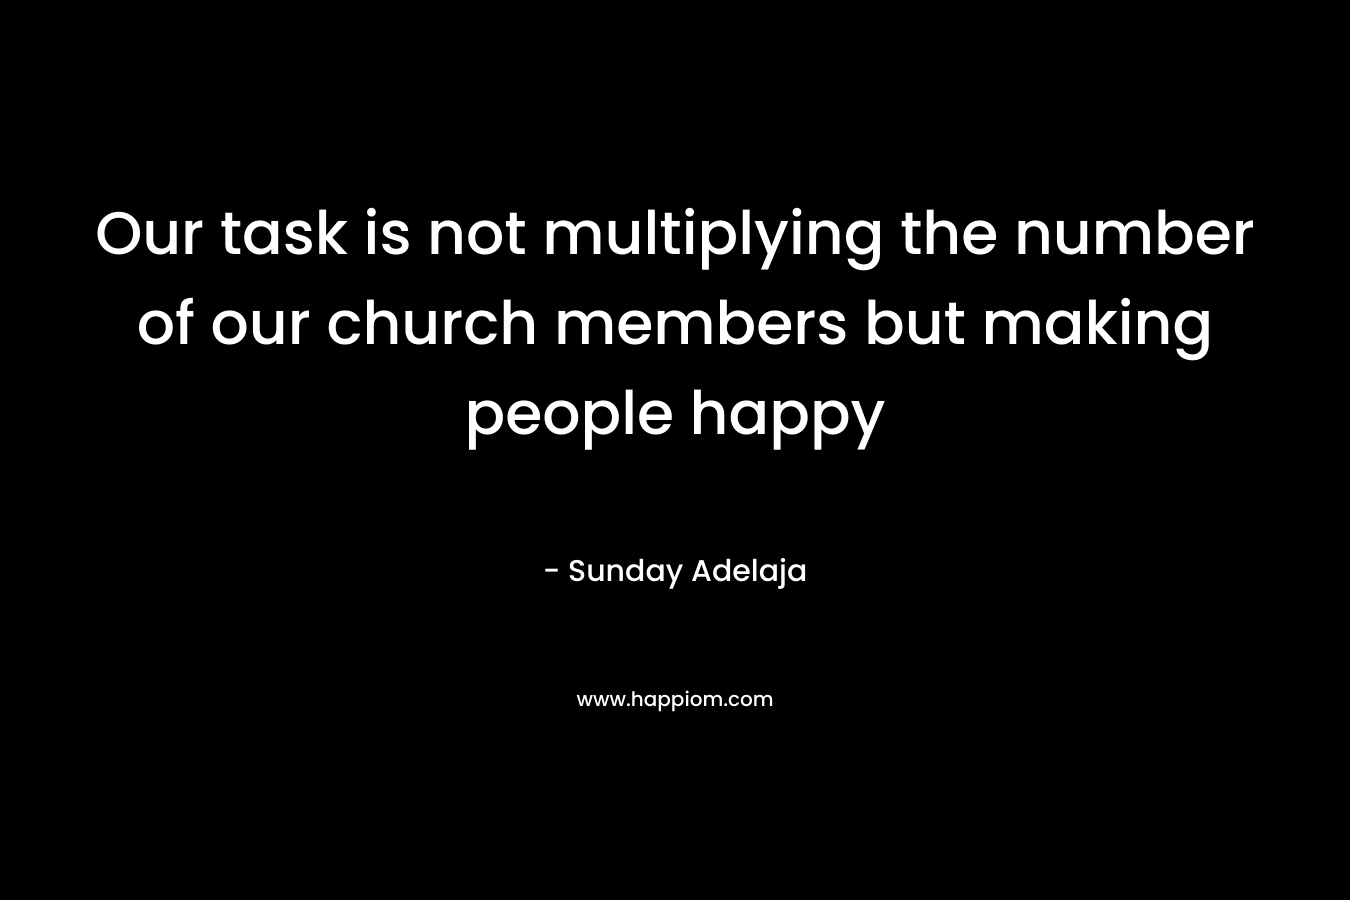 Our task is not multiplying the number of our church members but making people happy – Sunday Adelaja